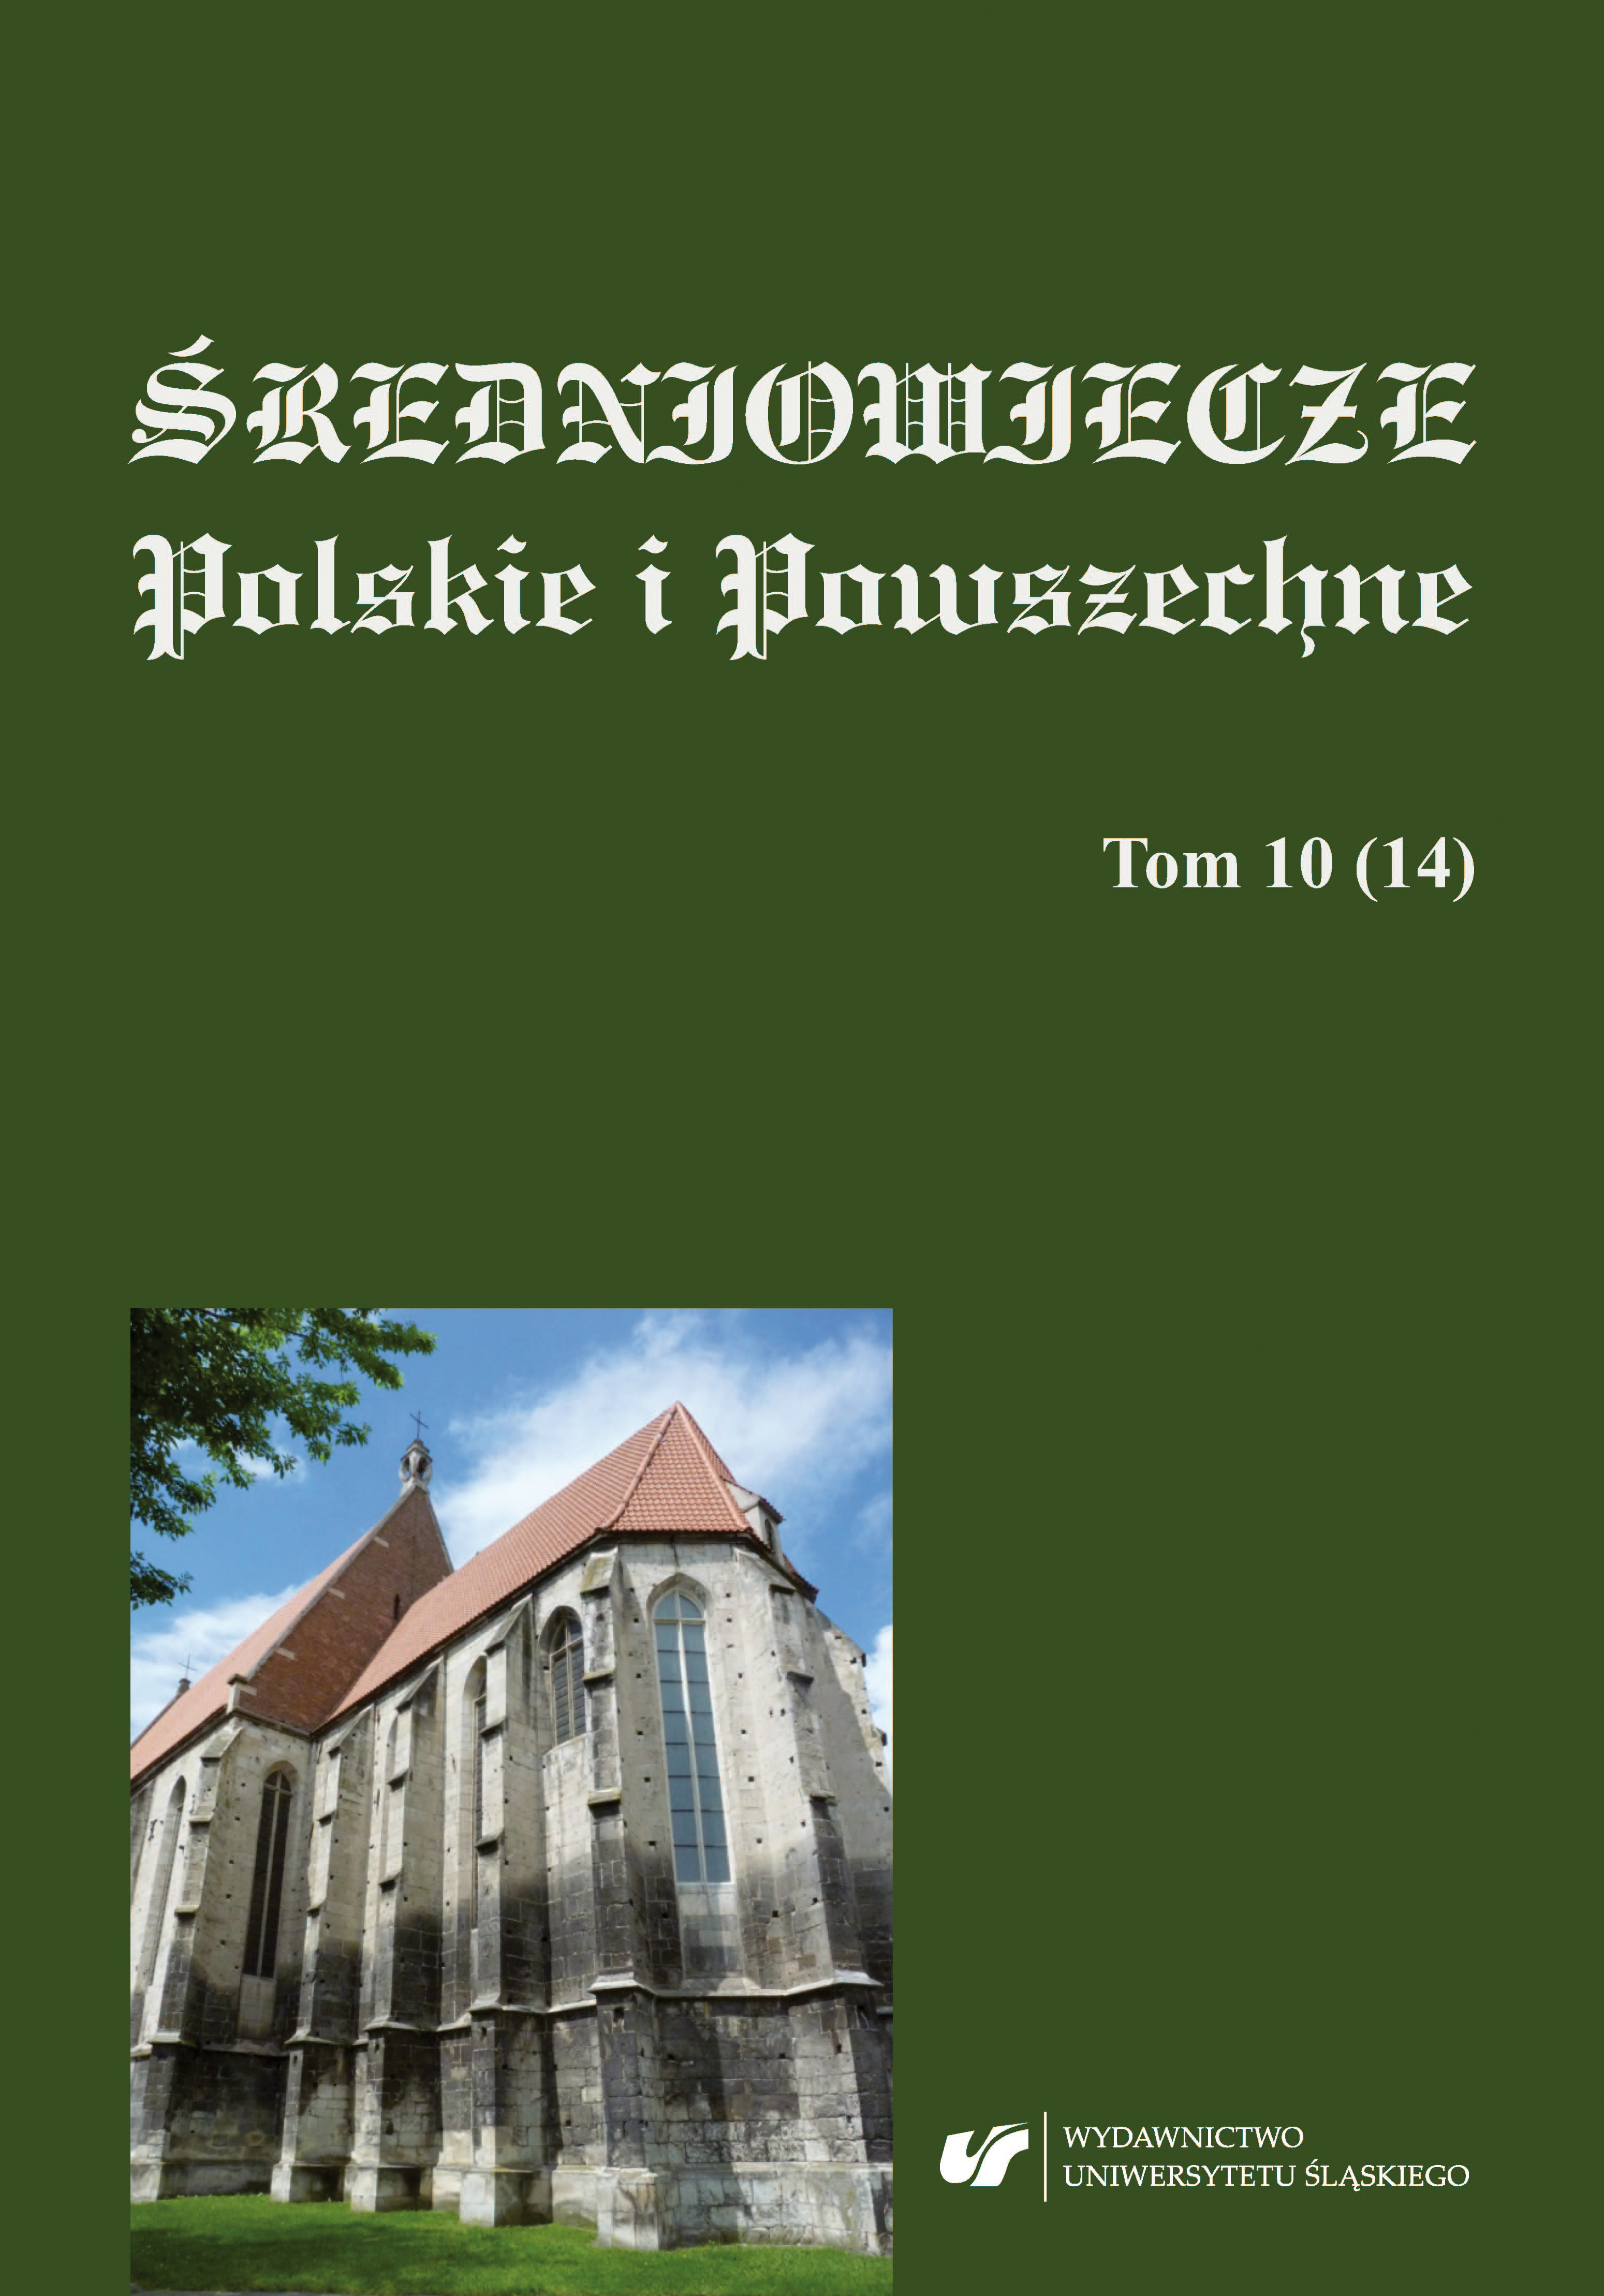 From a Prosecutor in the Roman Curia to an Adversary. The Role of Paweł of Kłodawa in the Dispute Regarding the Tithes of the Czernięcin Church Cover Image